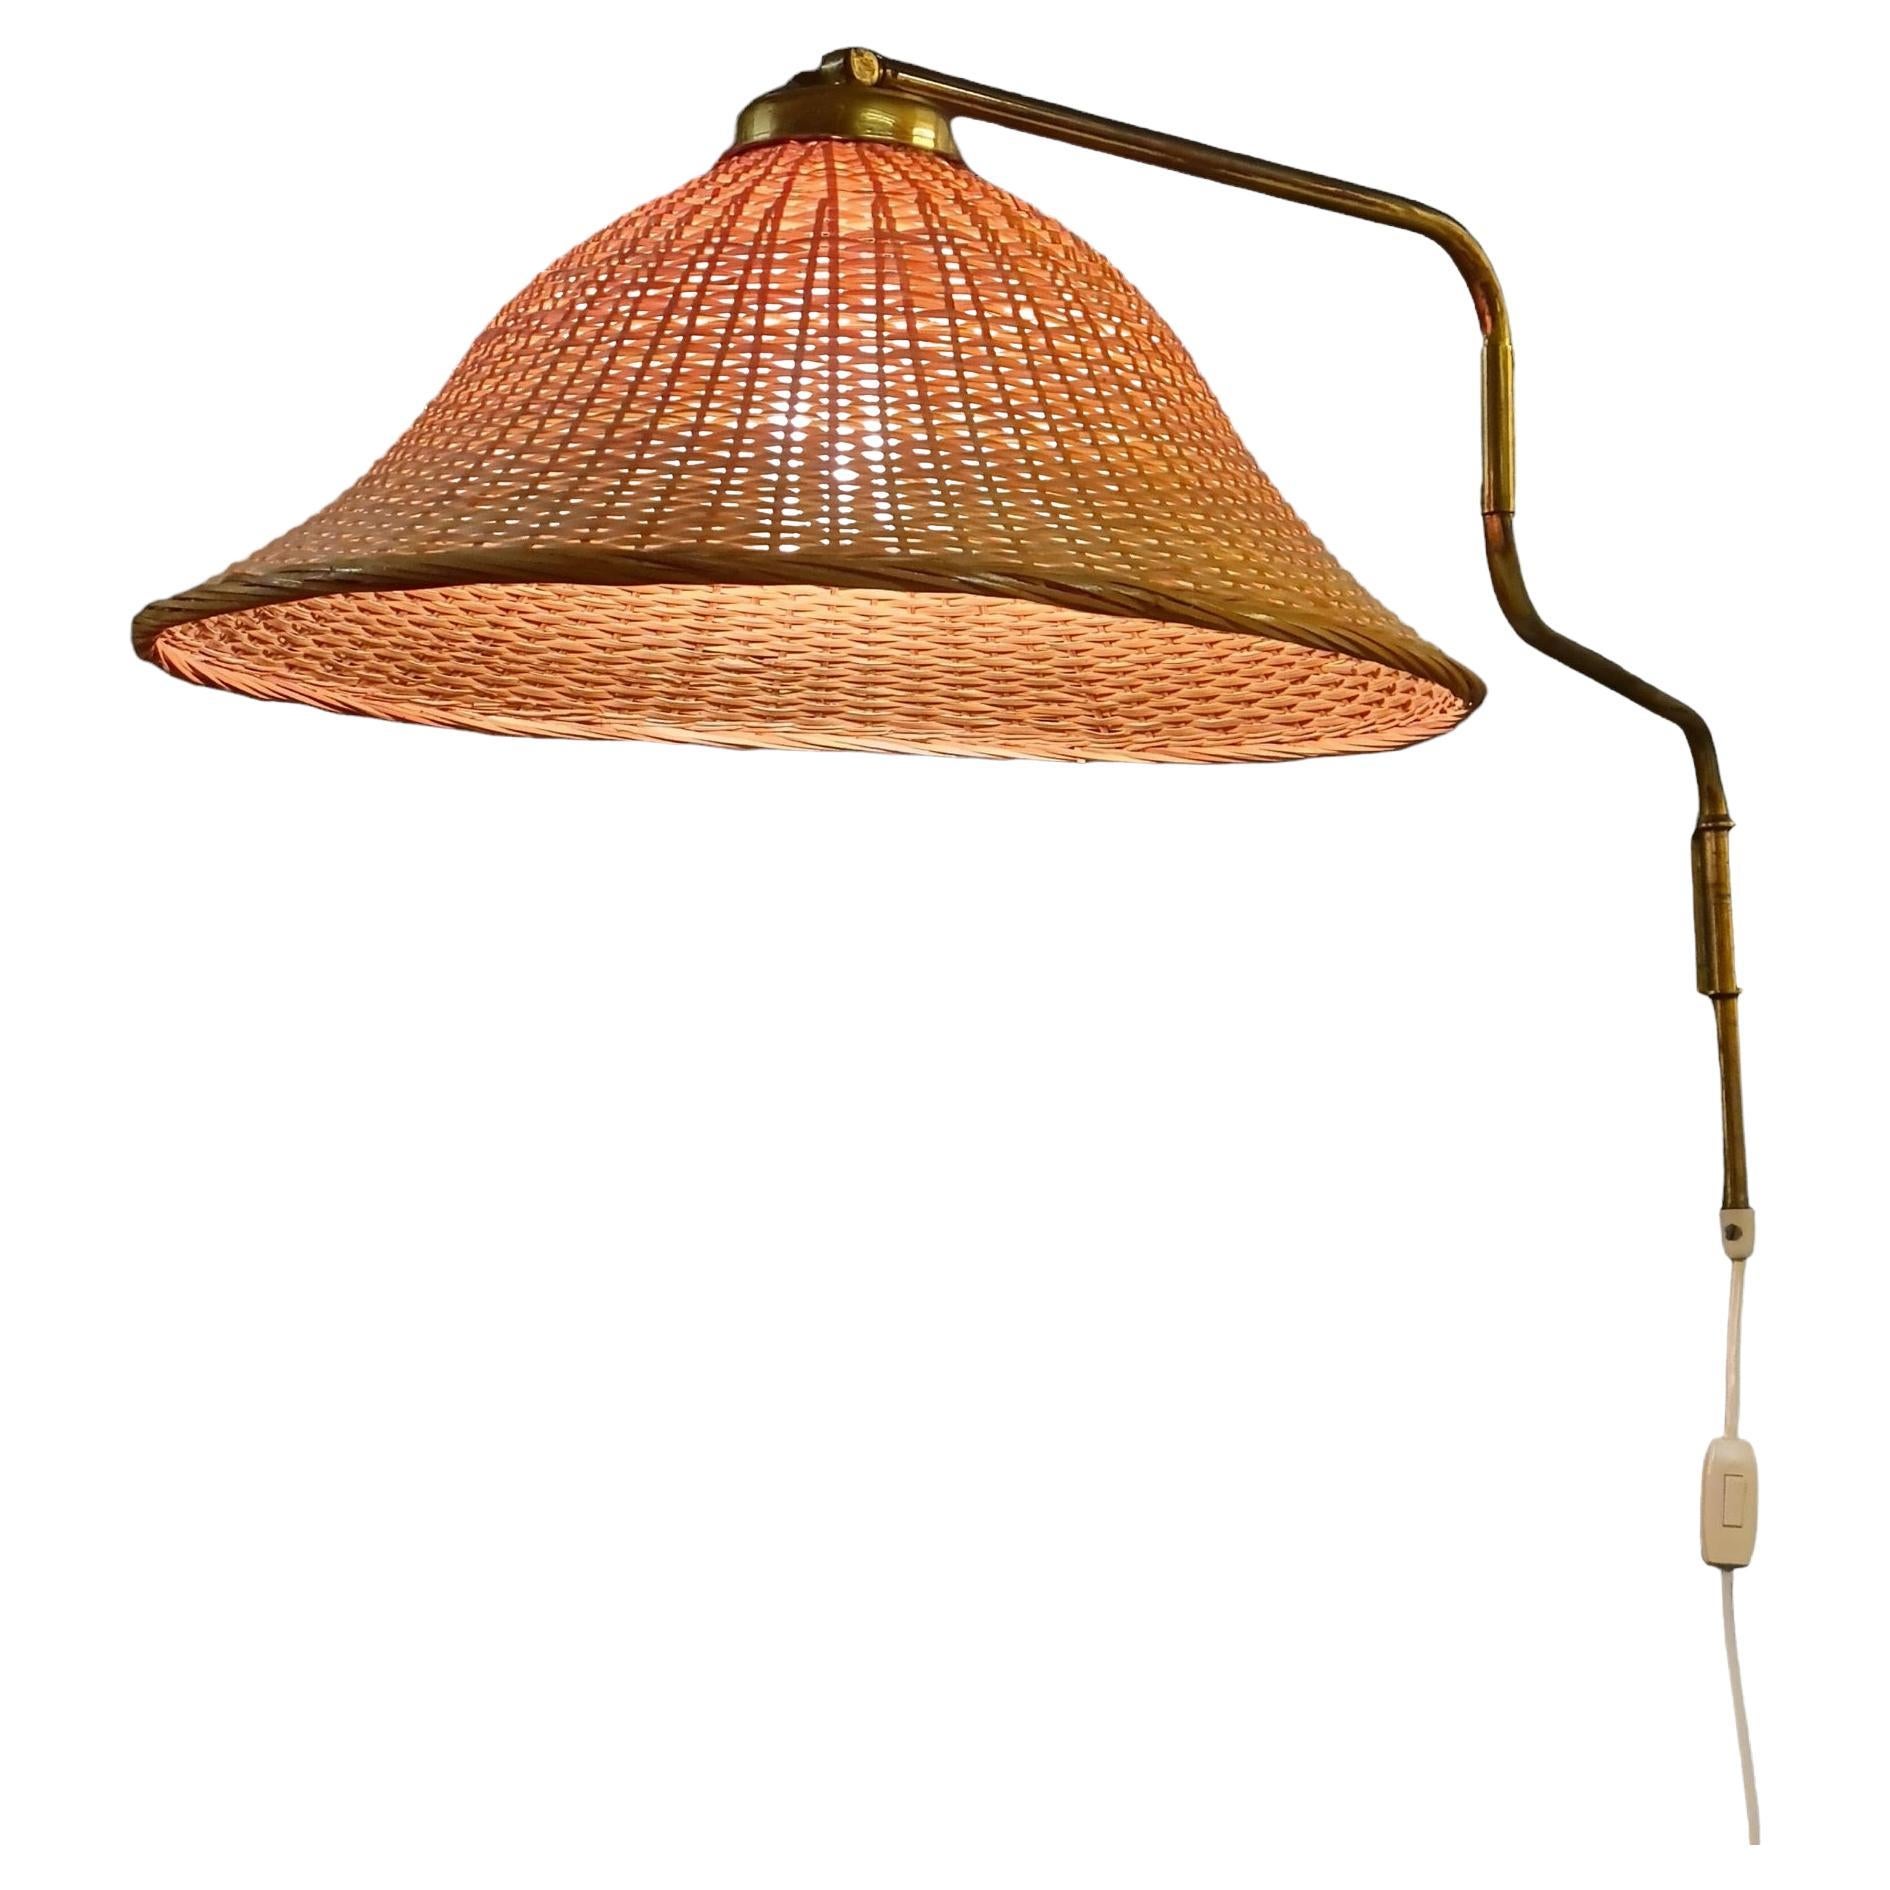 A Vintage Finnish Design Wall Lamp, 1950s